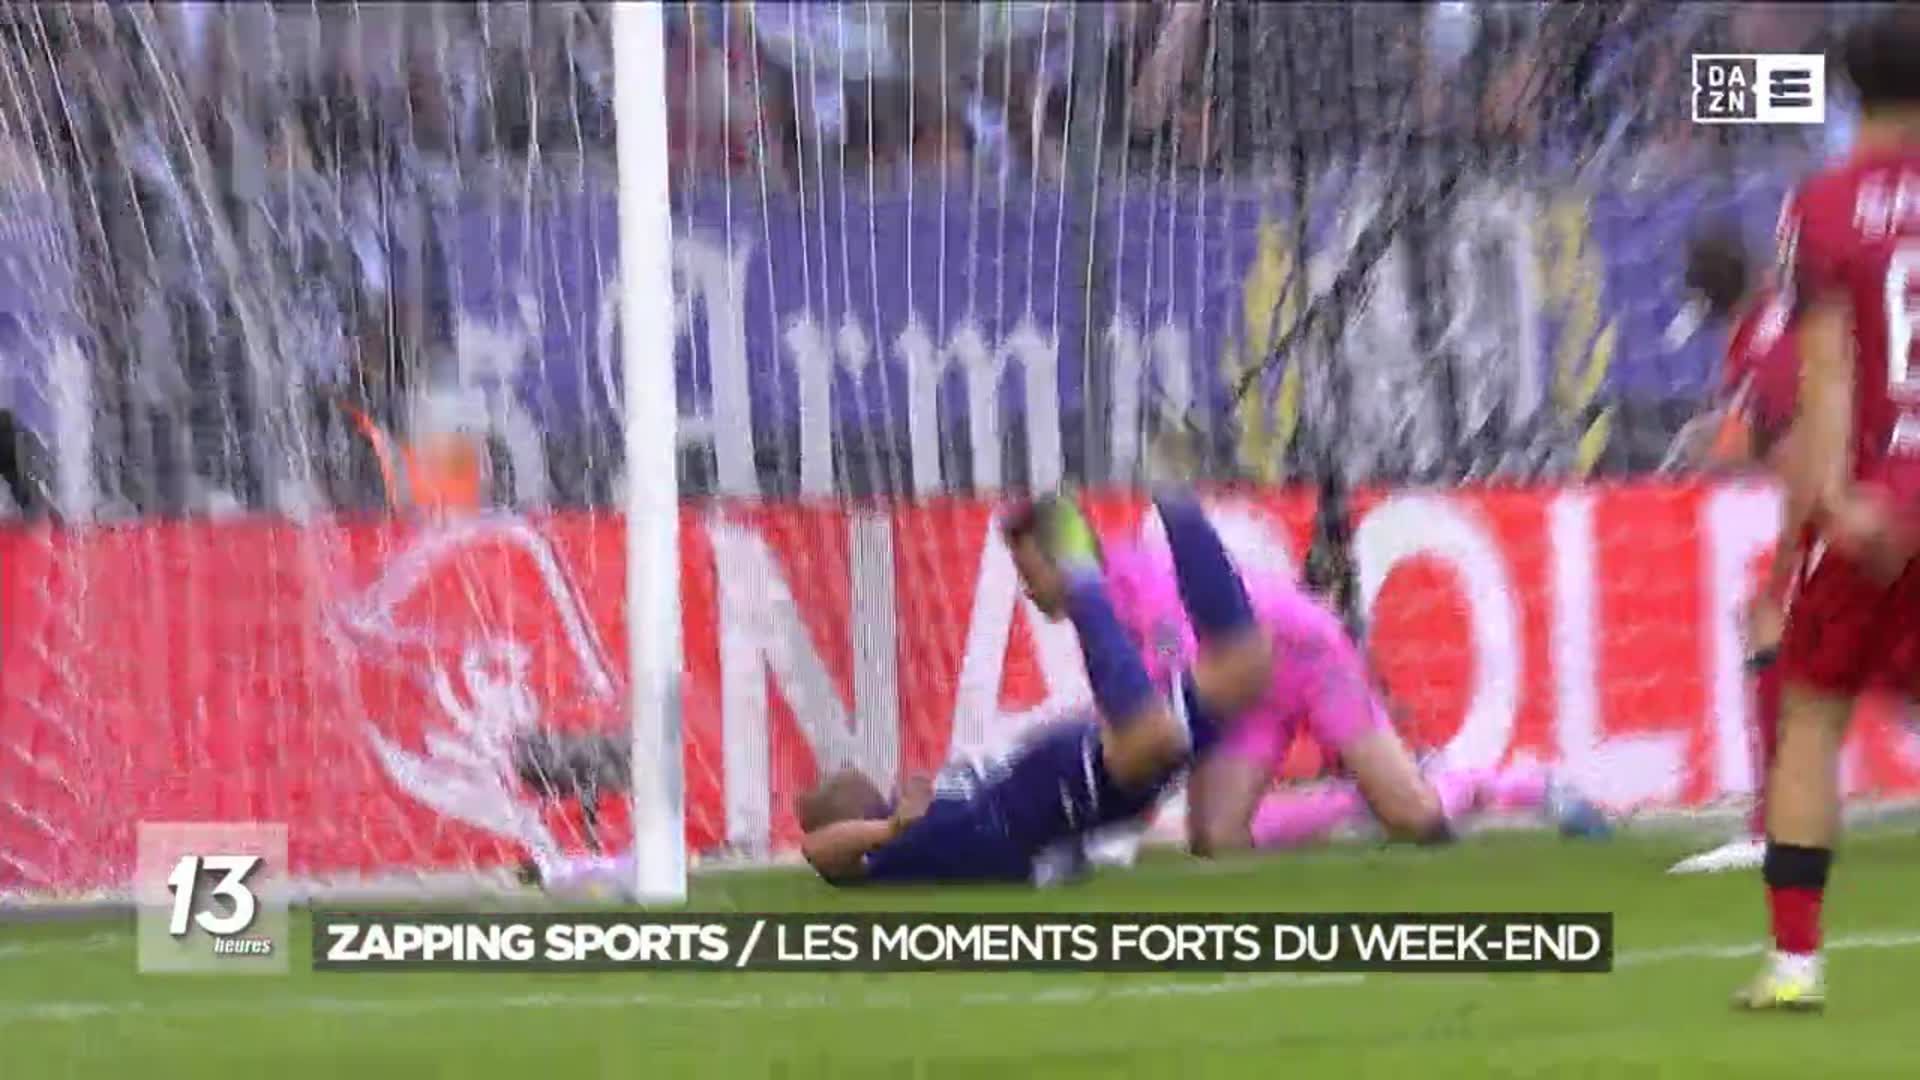 Zapping sports : les moments forts du week-end